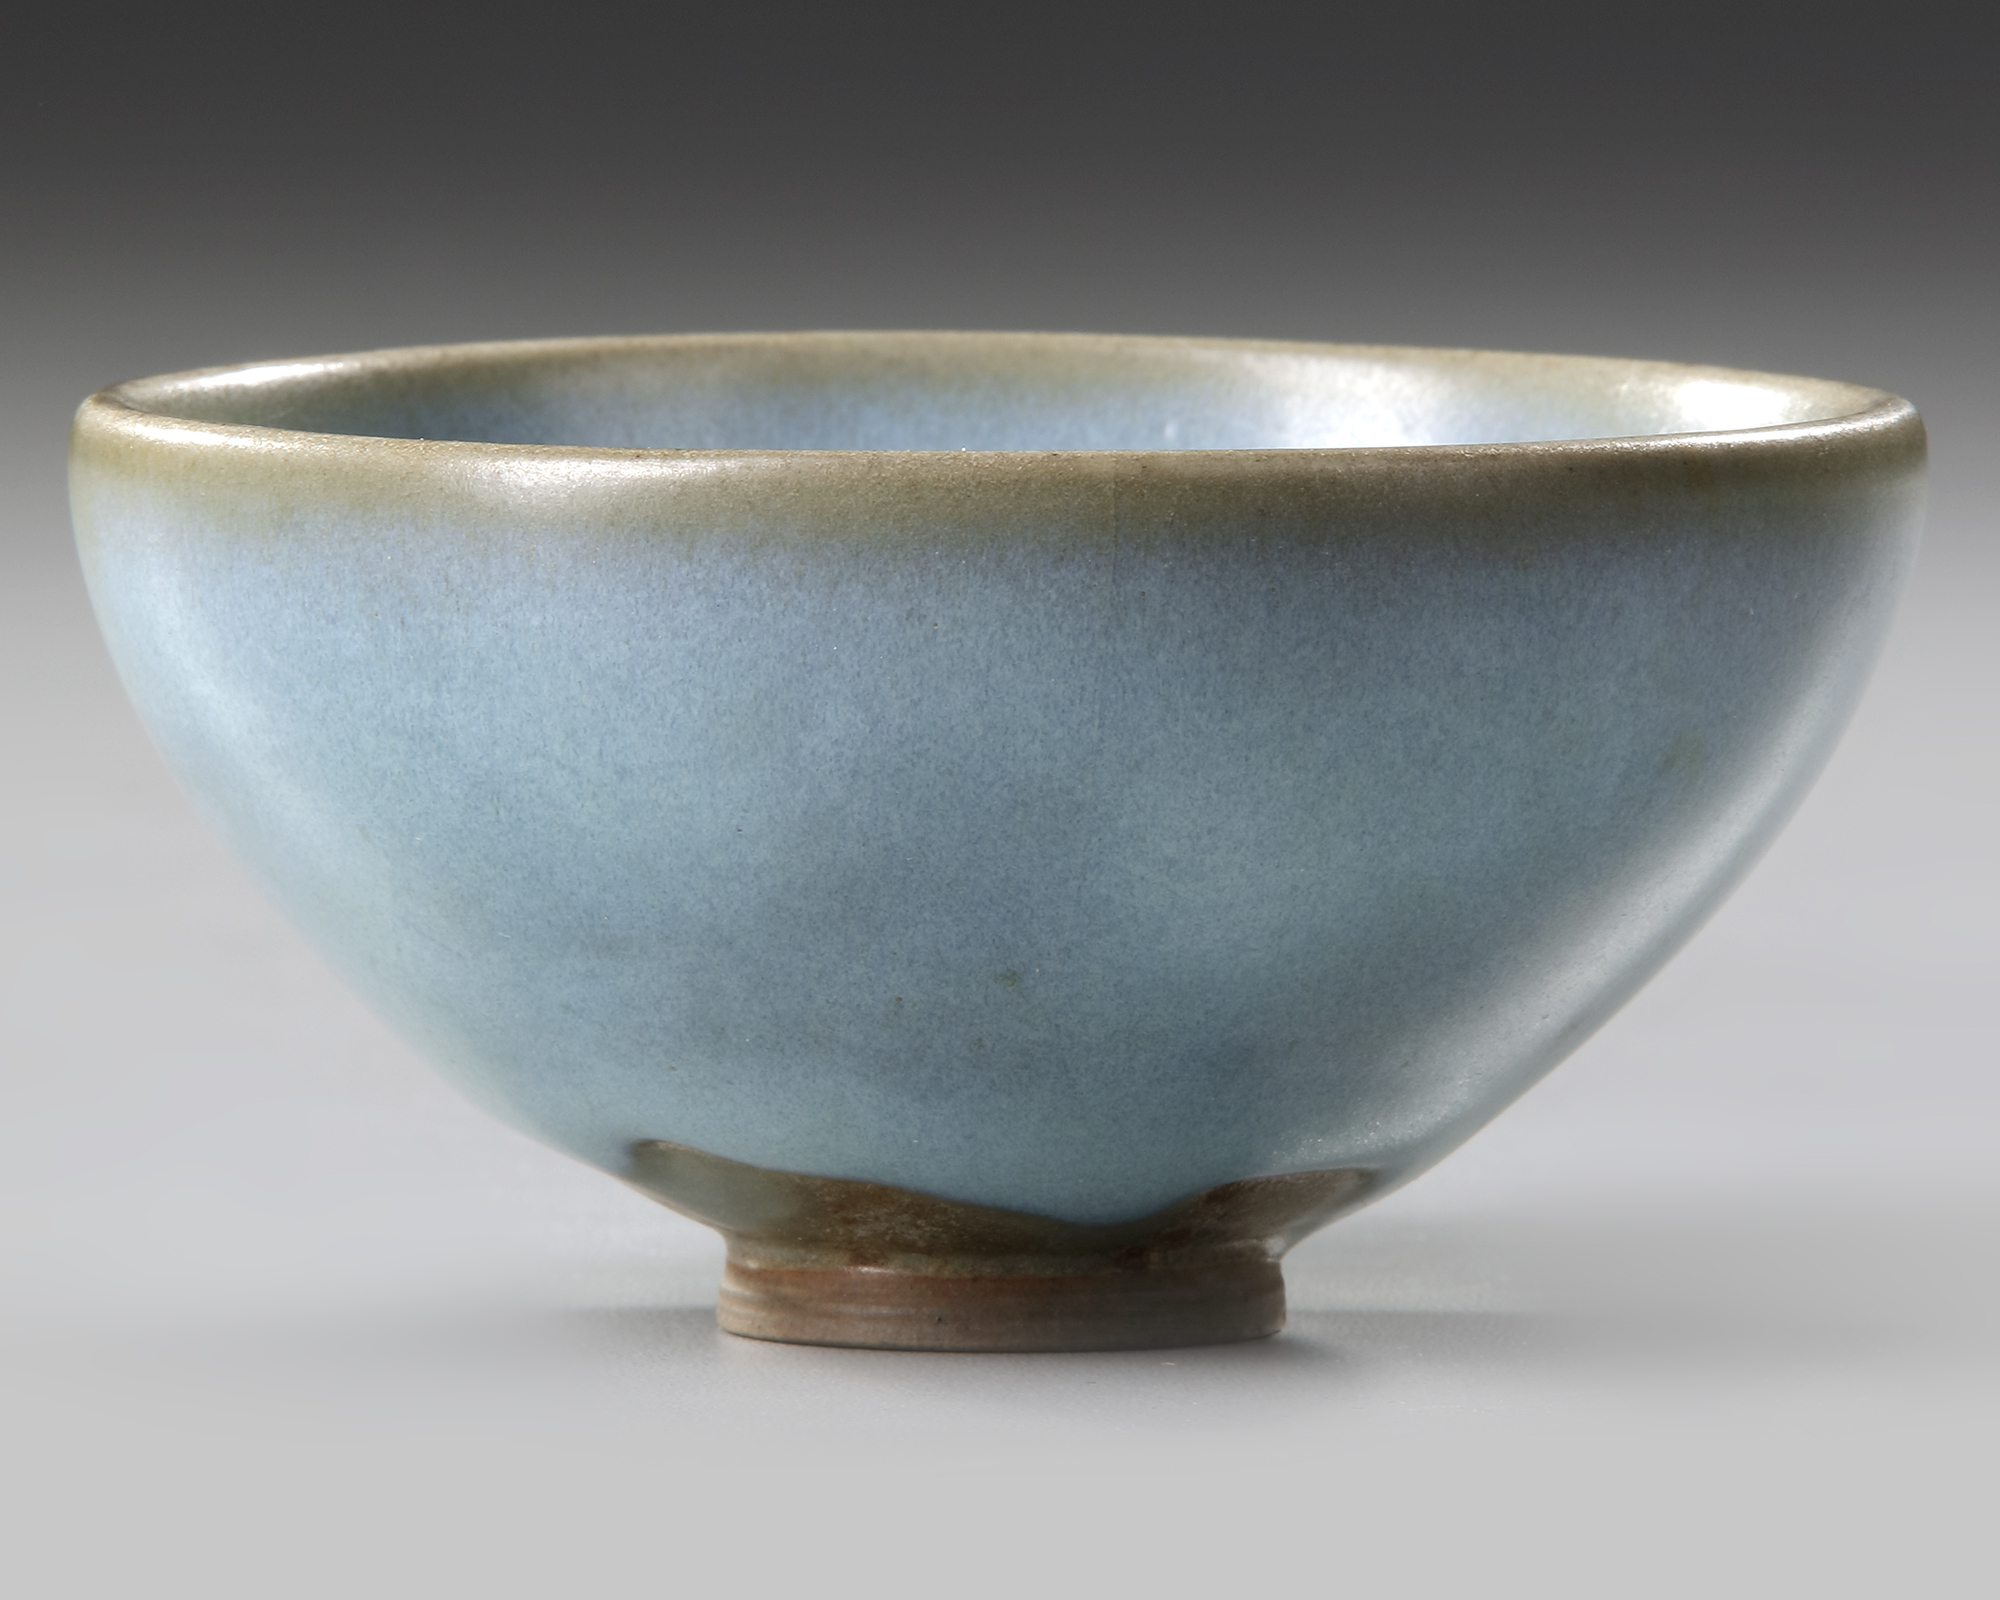 A CHINESE JUNYAO BLUE-GLAZED BOWL, SONG-JIN DYNASTY (11TH-12TH CENTURY) - Image 2 of 5